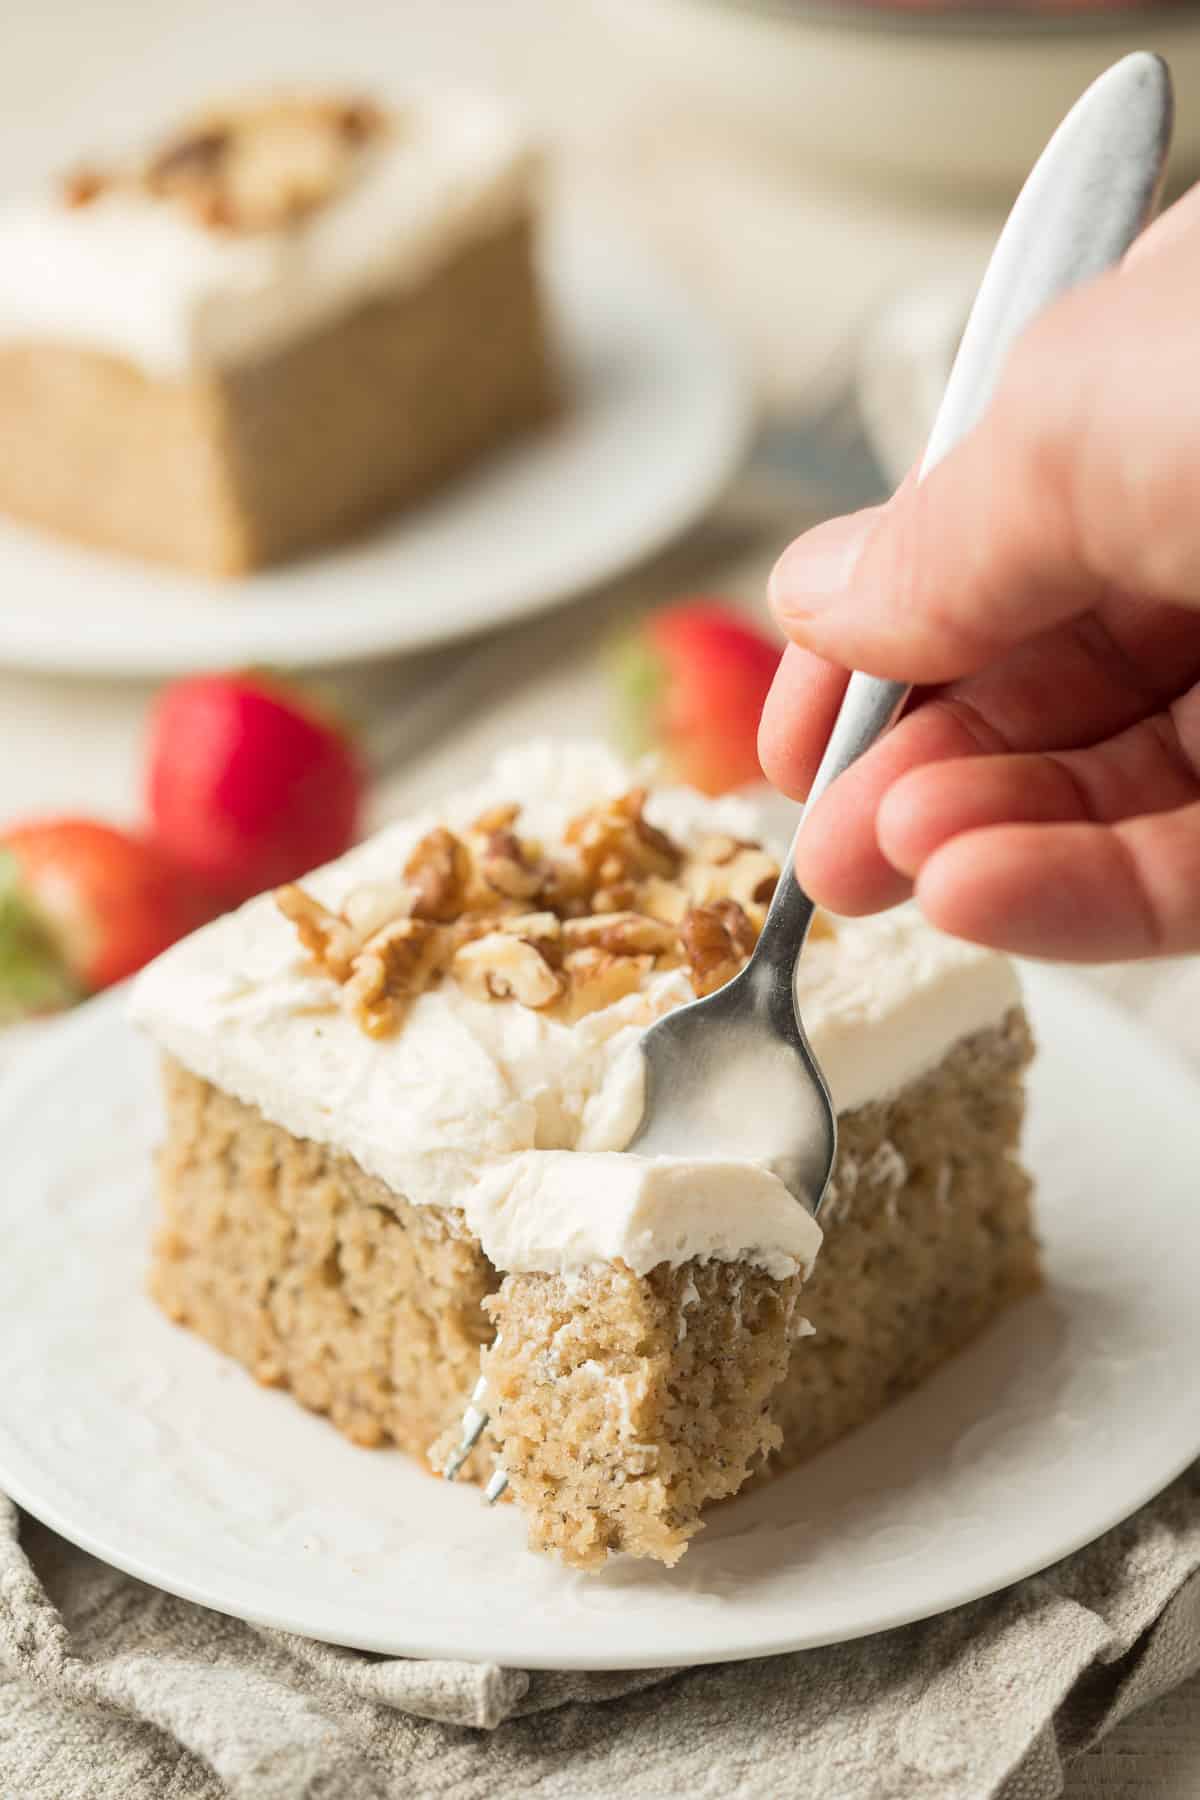 Hand scooping a bite of Vegan Banana Cake from a slice sitting on a plate.